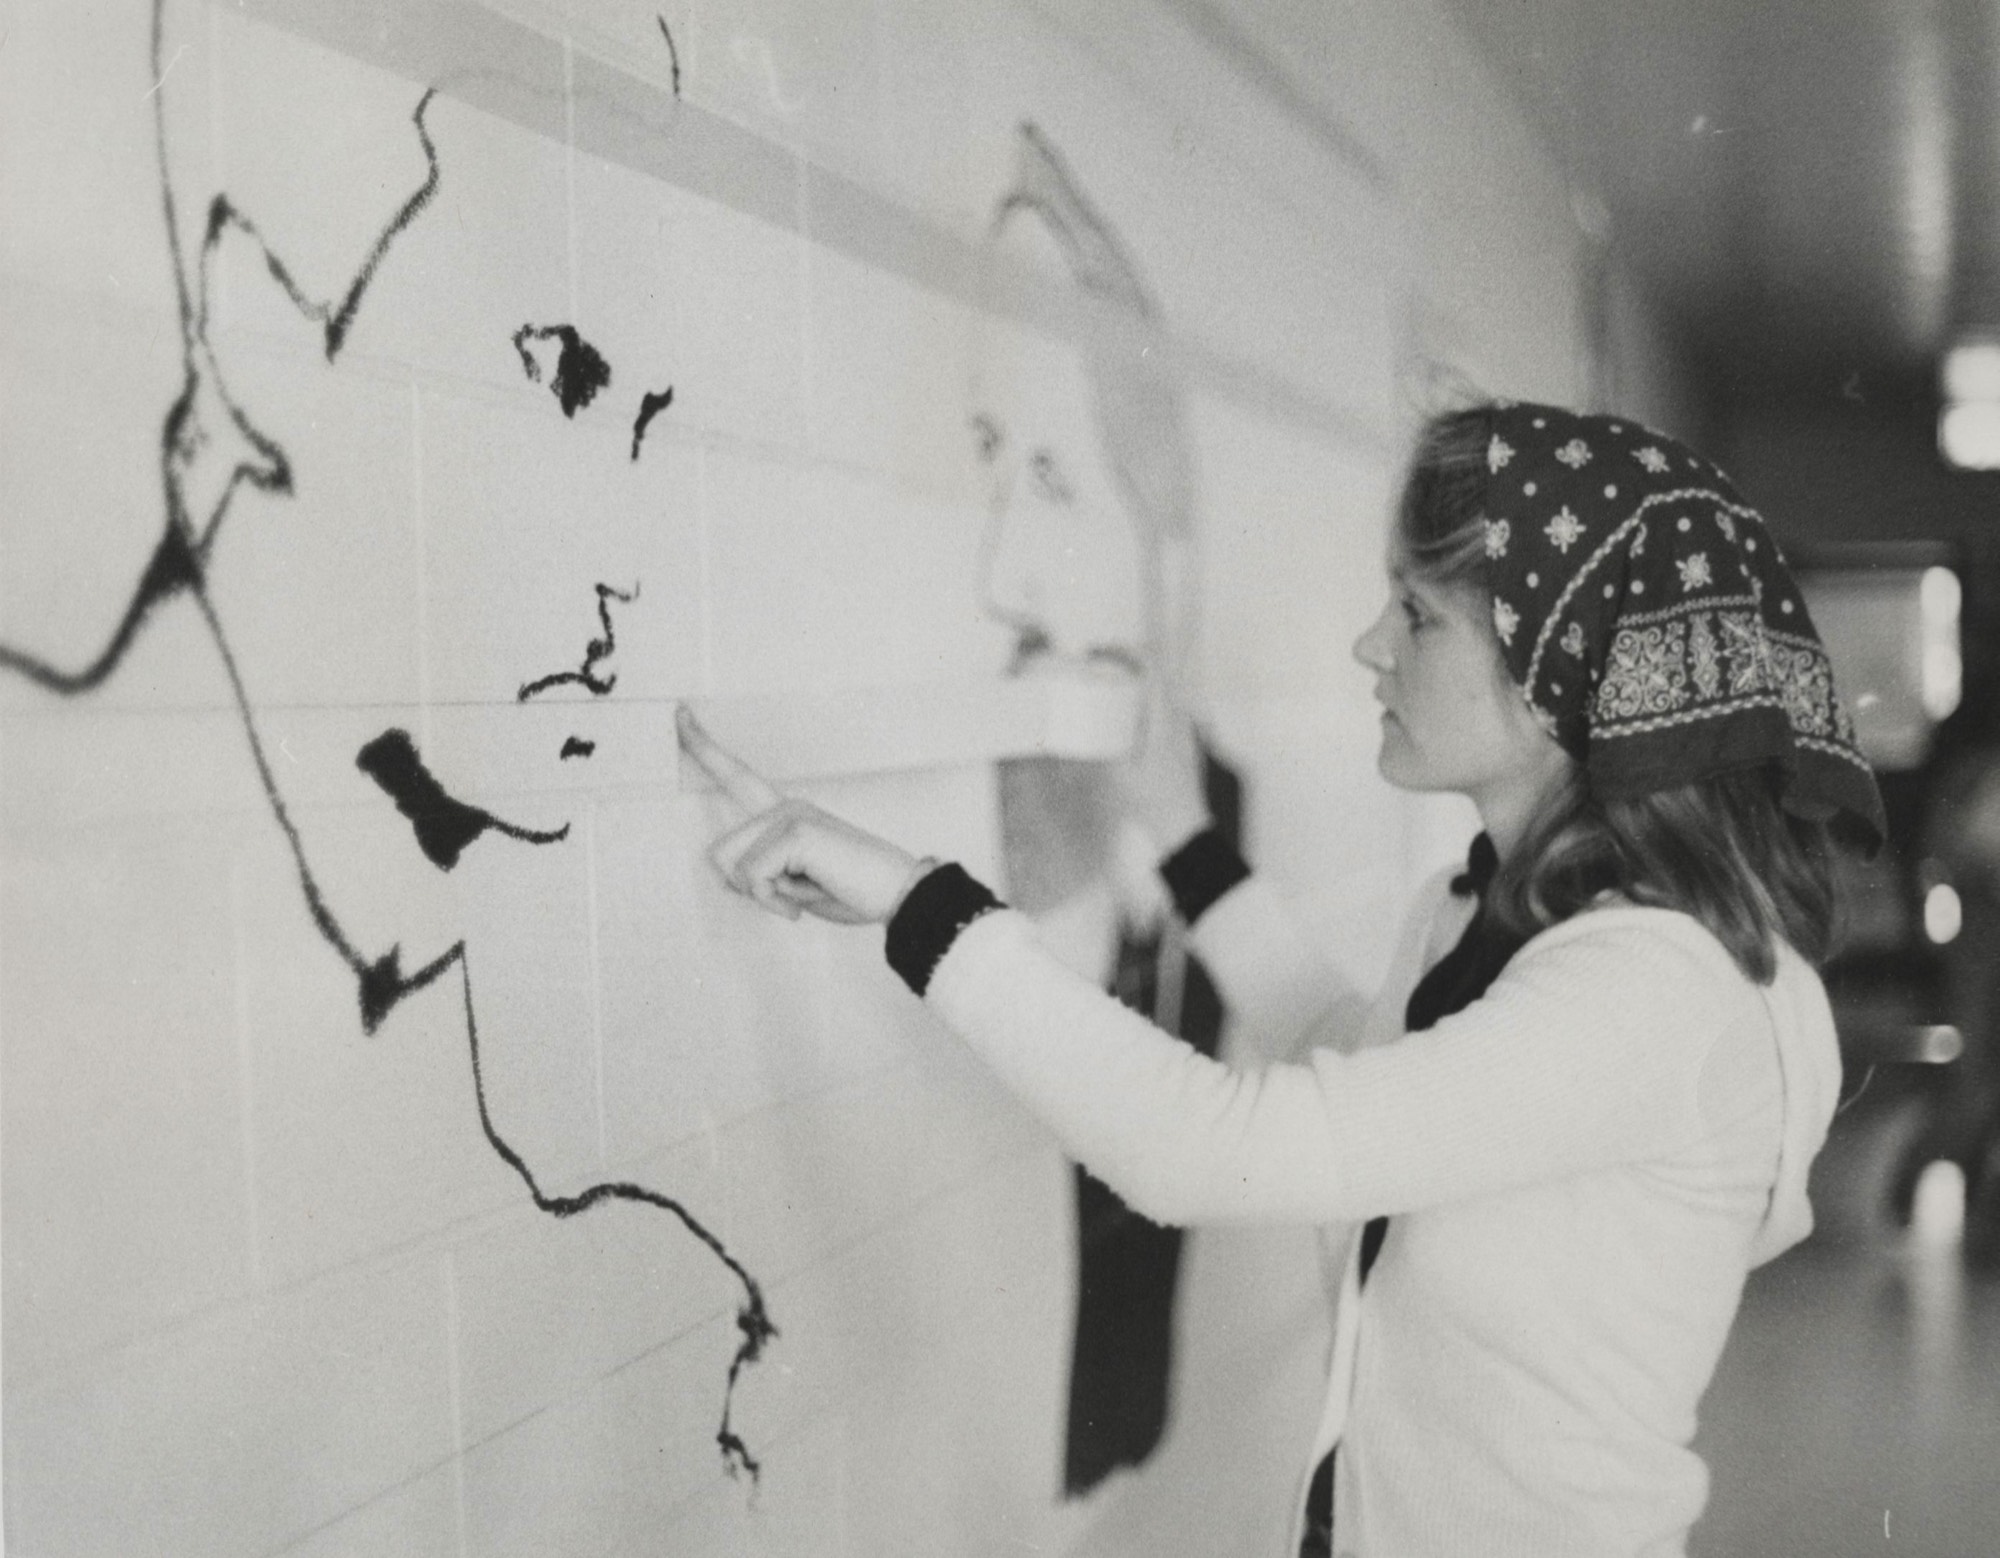 Student working on William James College mural.